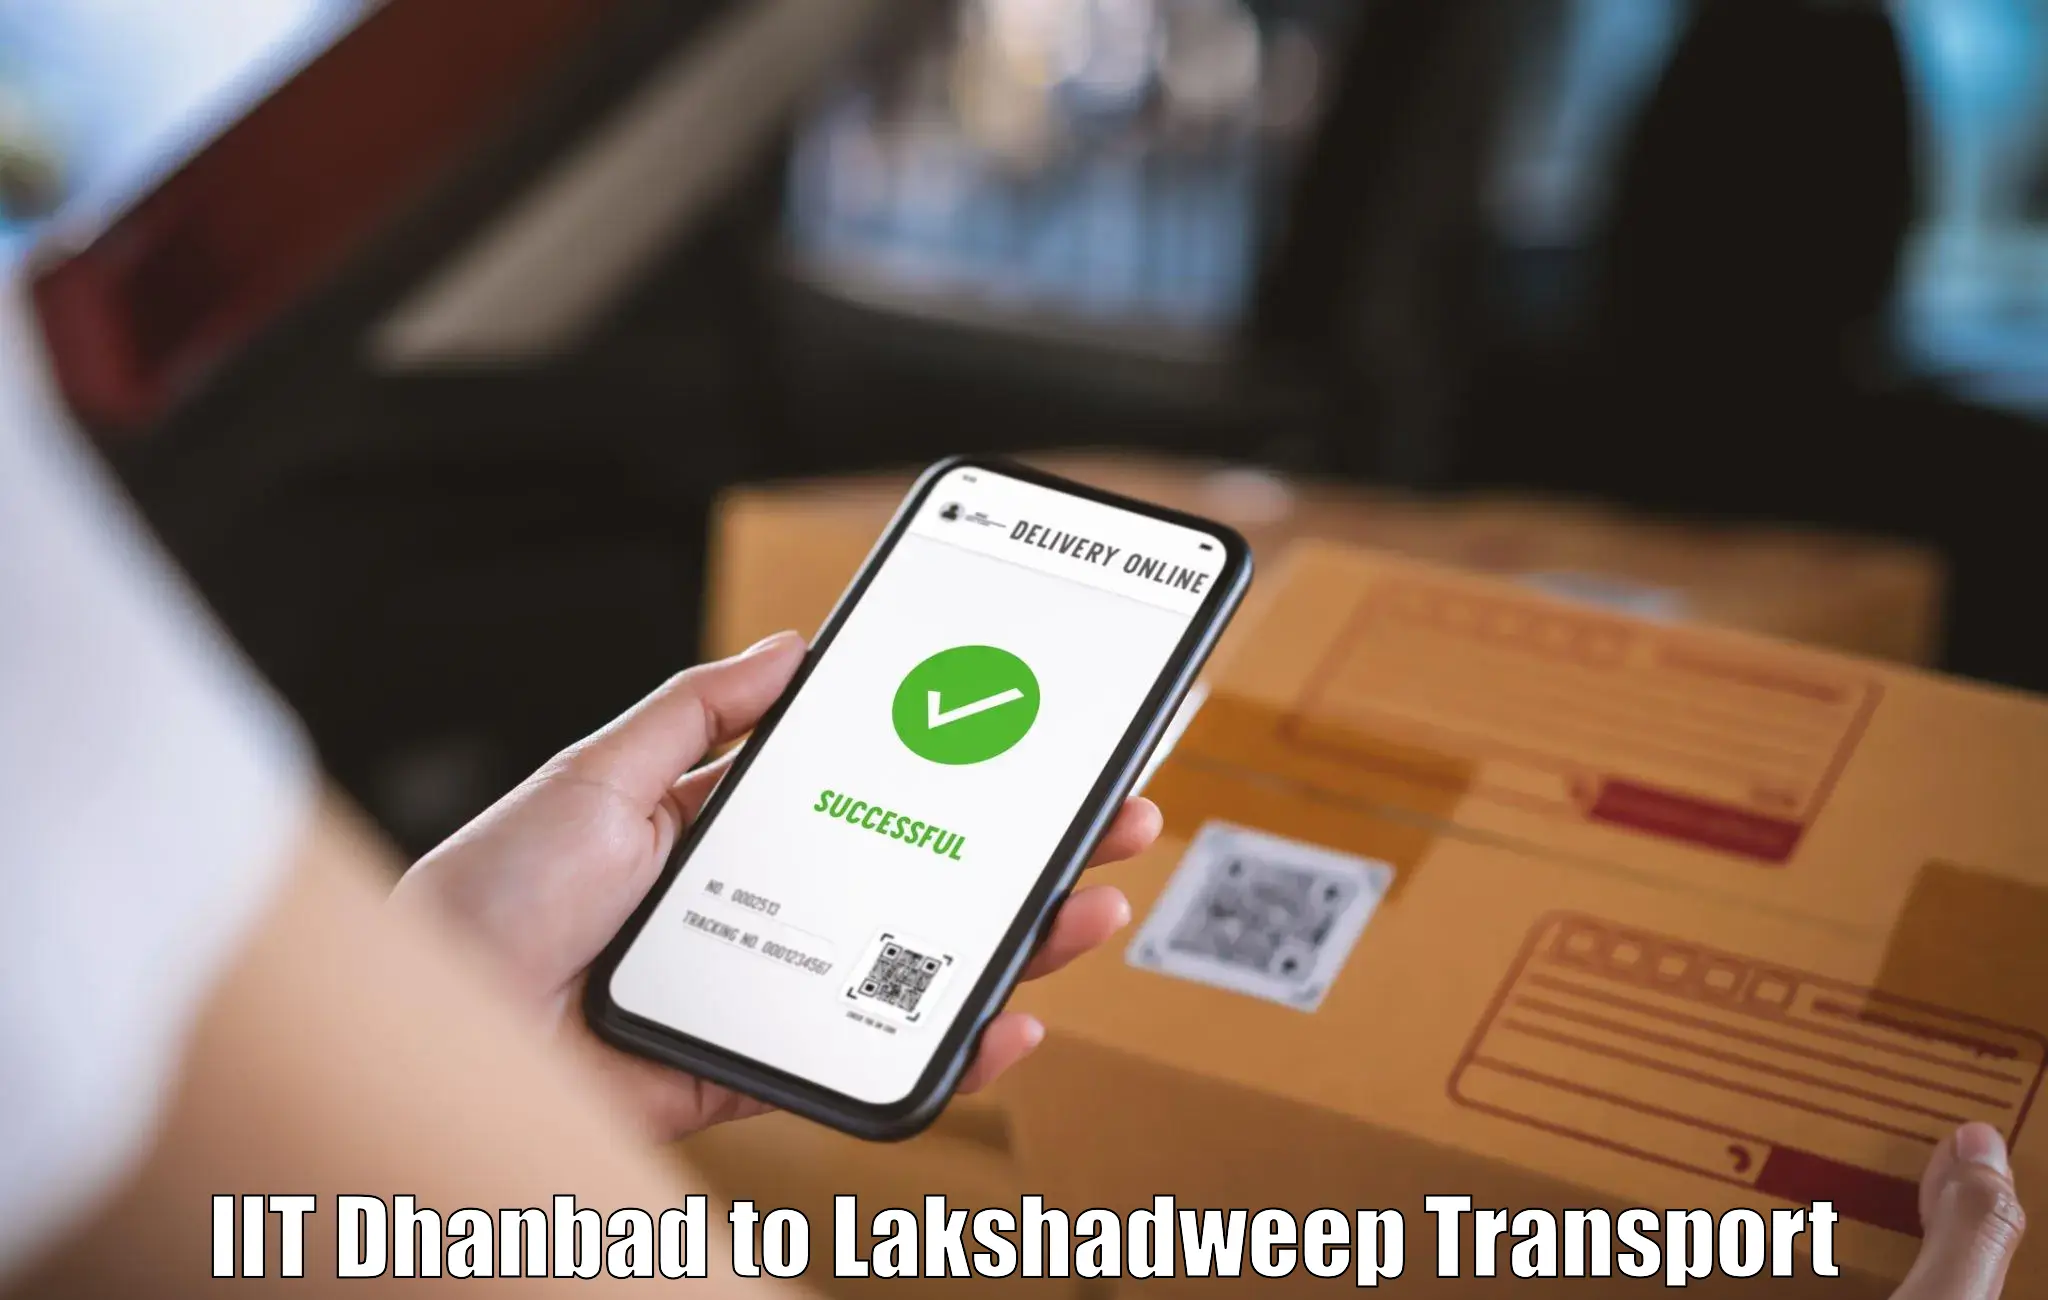 Nearby transport service IIT Dhanbad to Lakshadweep